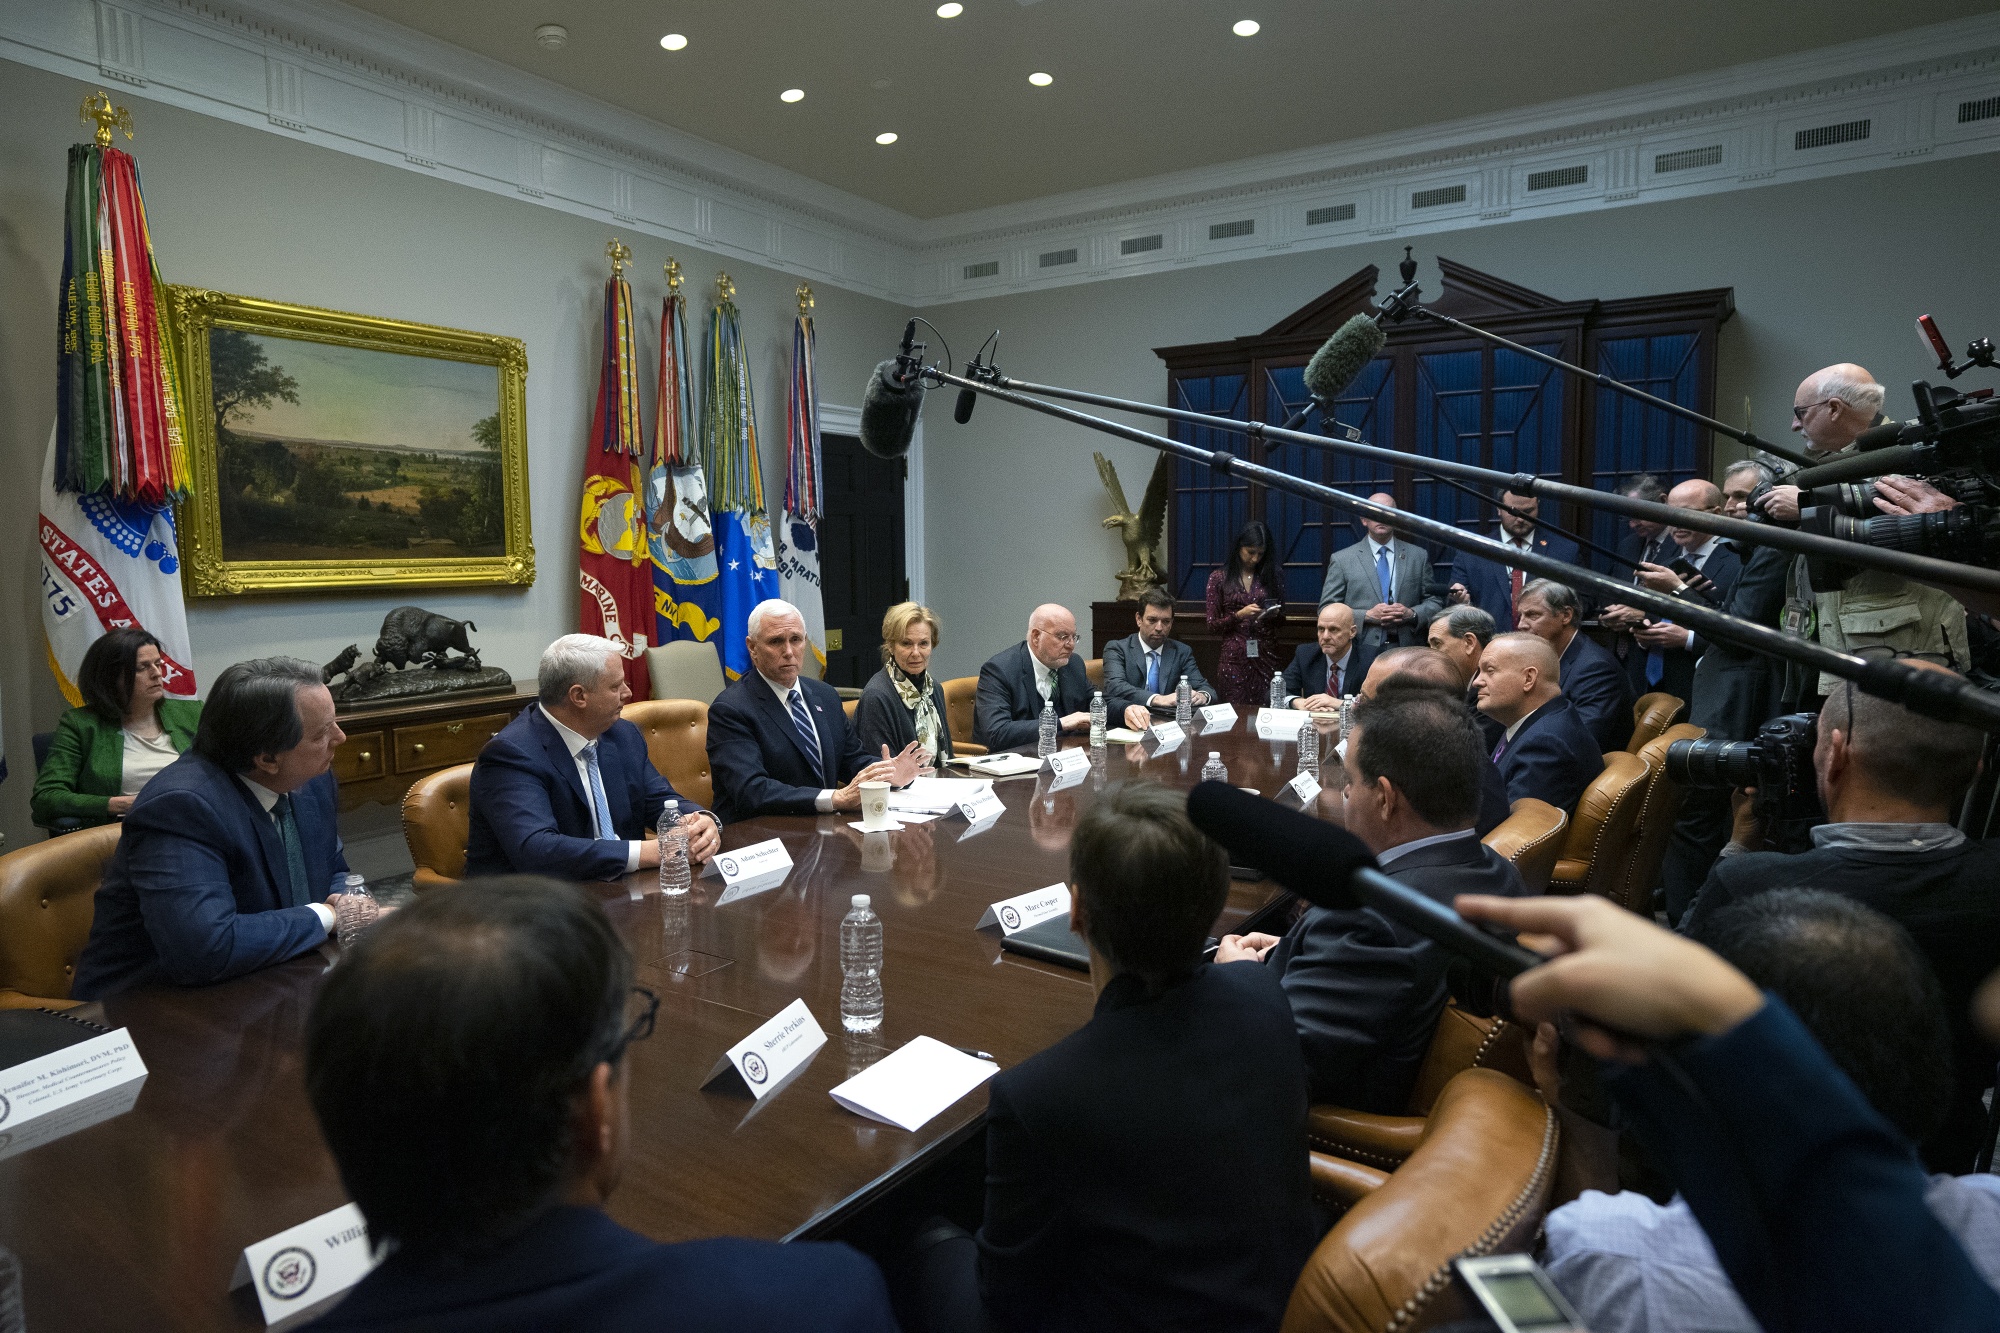 U.S. Vice President Mike Pence, center, speaks during a meeting with the Coronavirus Task Force and diagnostic lab executives at the White House in Washington, D.C., U.S.